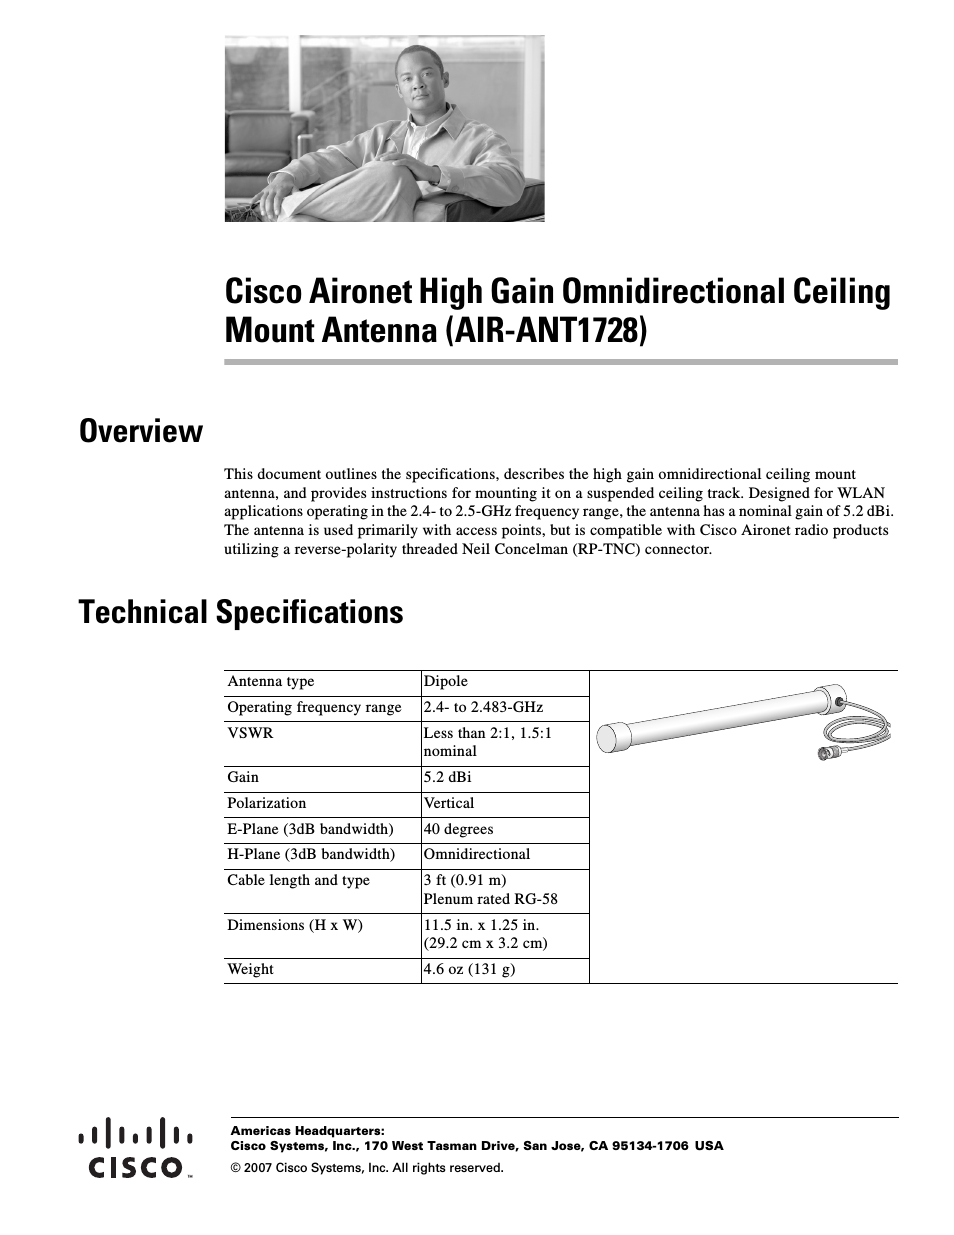 Aironet High Gain Omnidirectional Ceiling Mount Antenna AIR-ANT1728